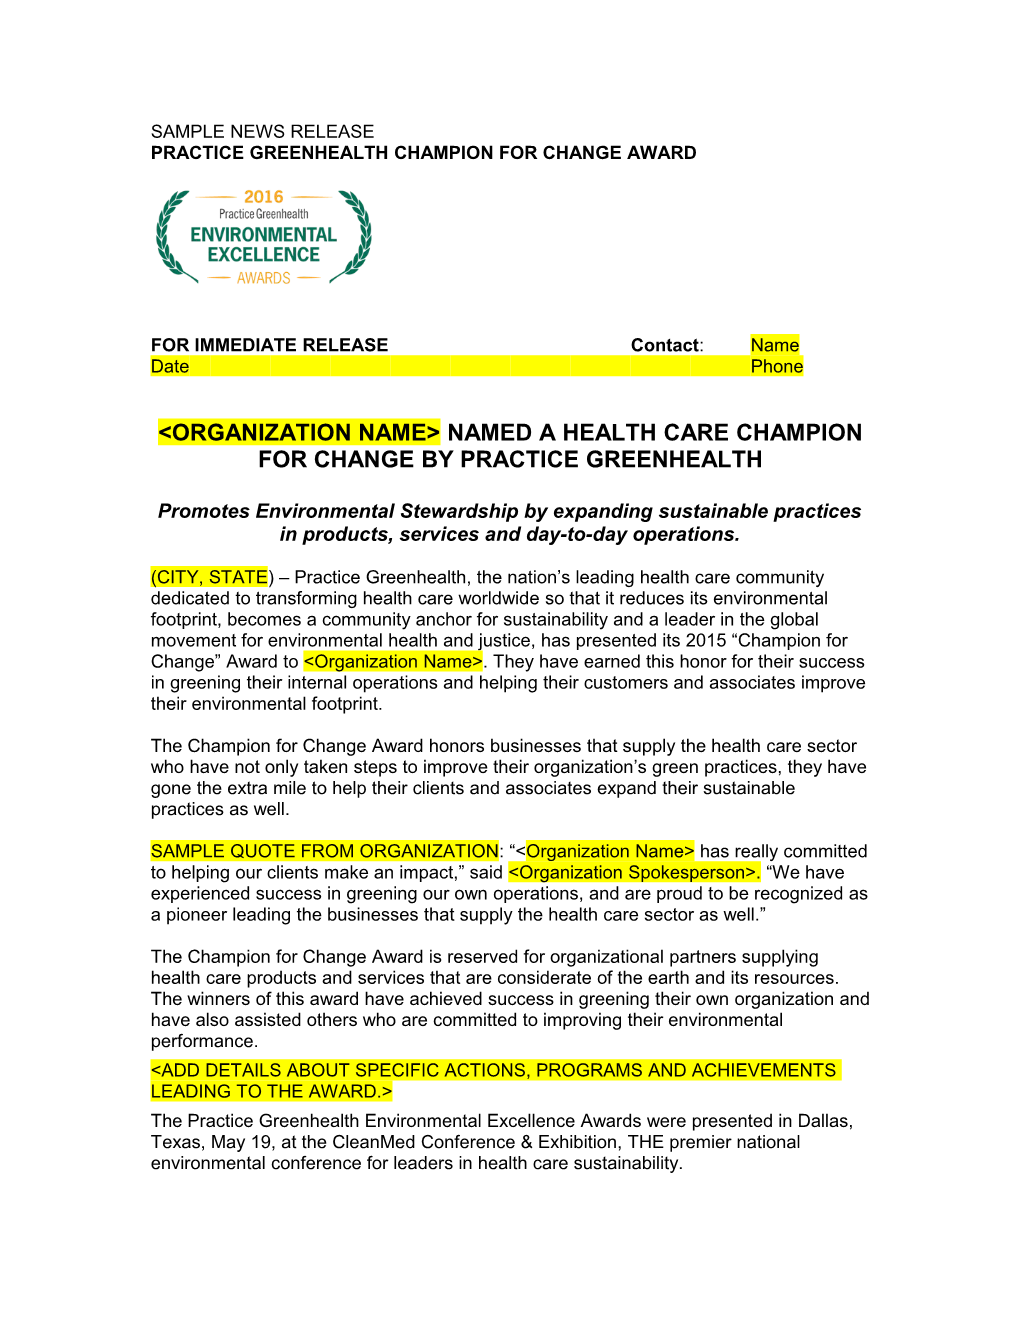 Sample News Release Practice Greenhealth Champion for Change Award